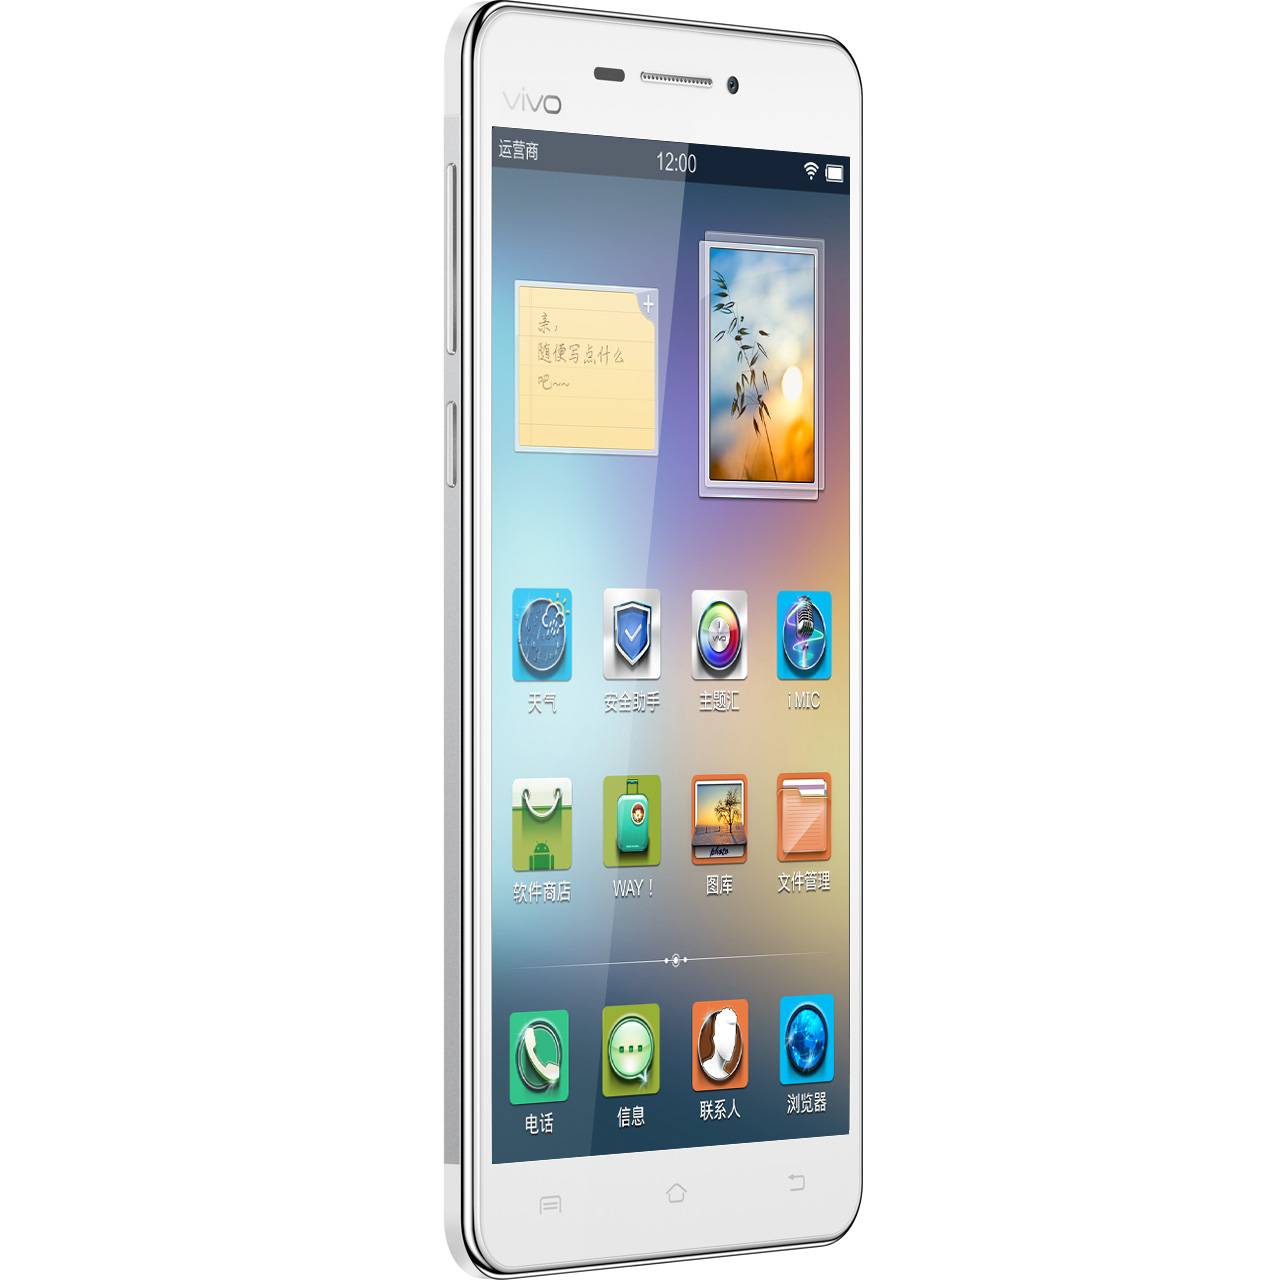 Vivo X3 is here, world’s thinnest phone so far - Android Community